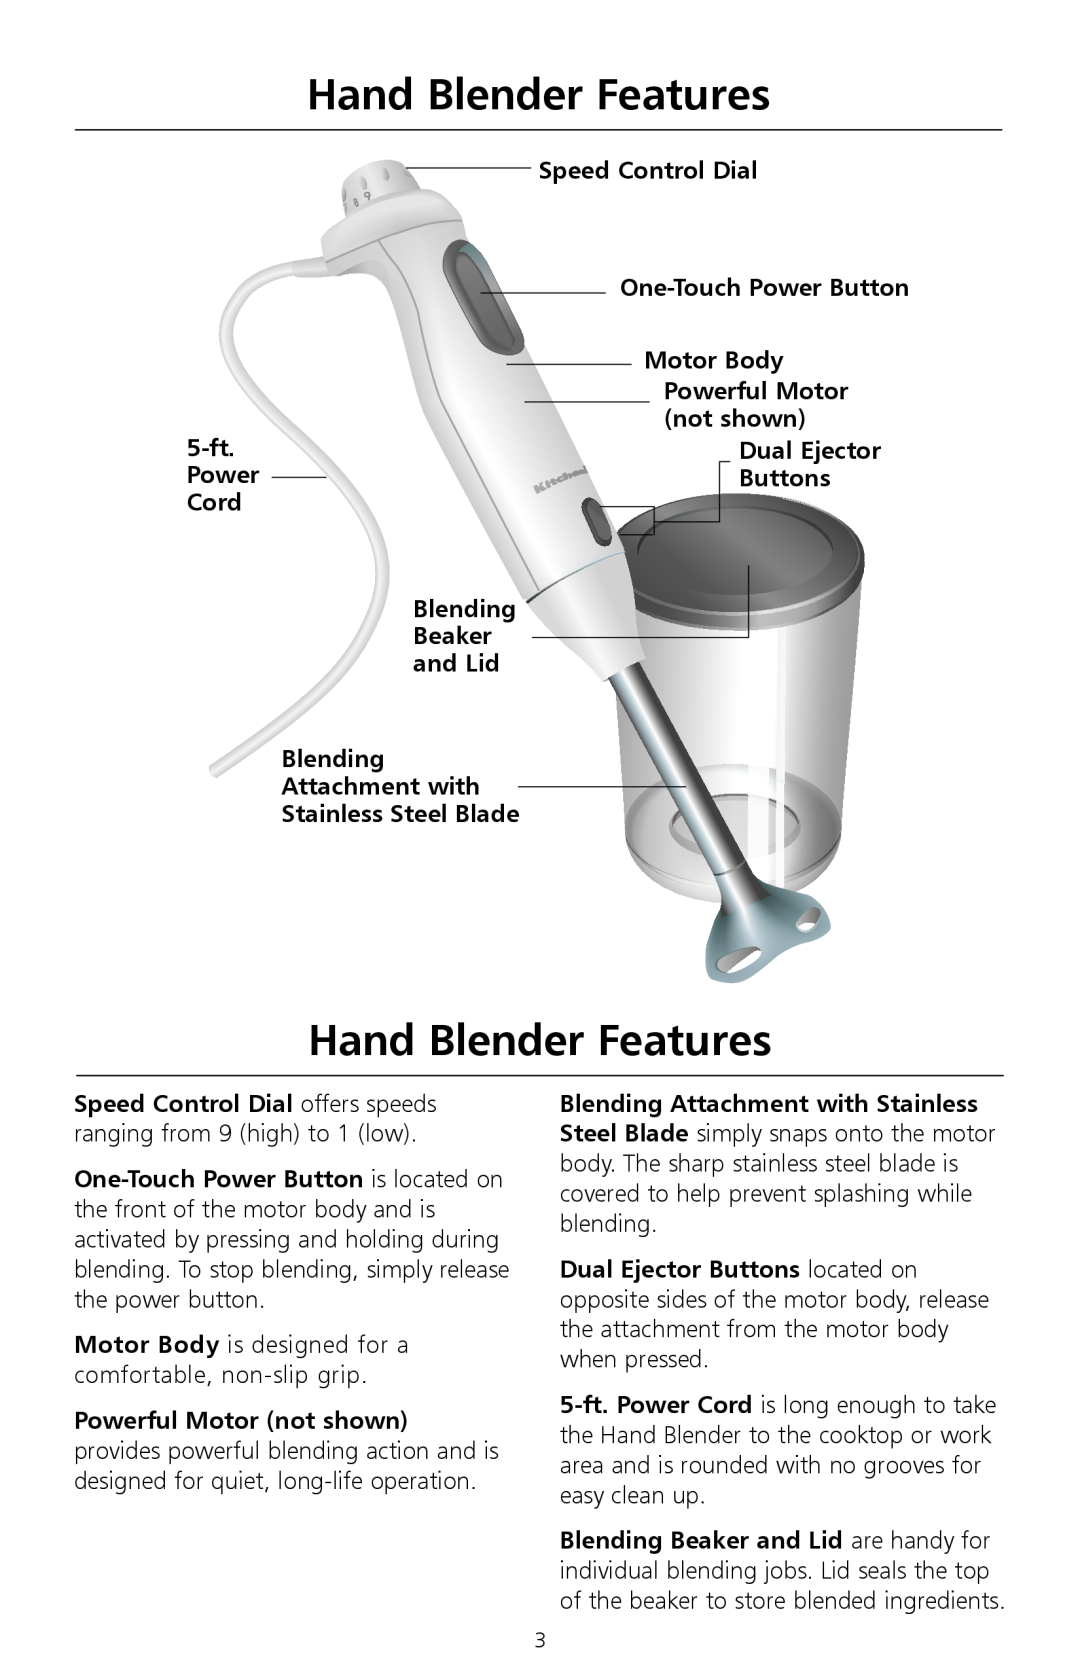 KitchenAid 5KHB100 Hand Blender Features, Speed Control Dial, One-Touch Power Button, Motor Body, Powerful Motor, 5-ft 